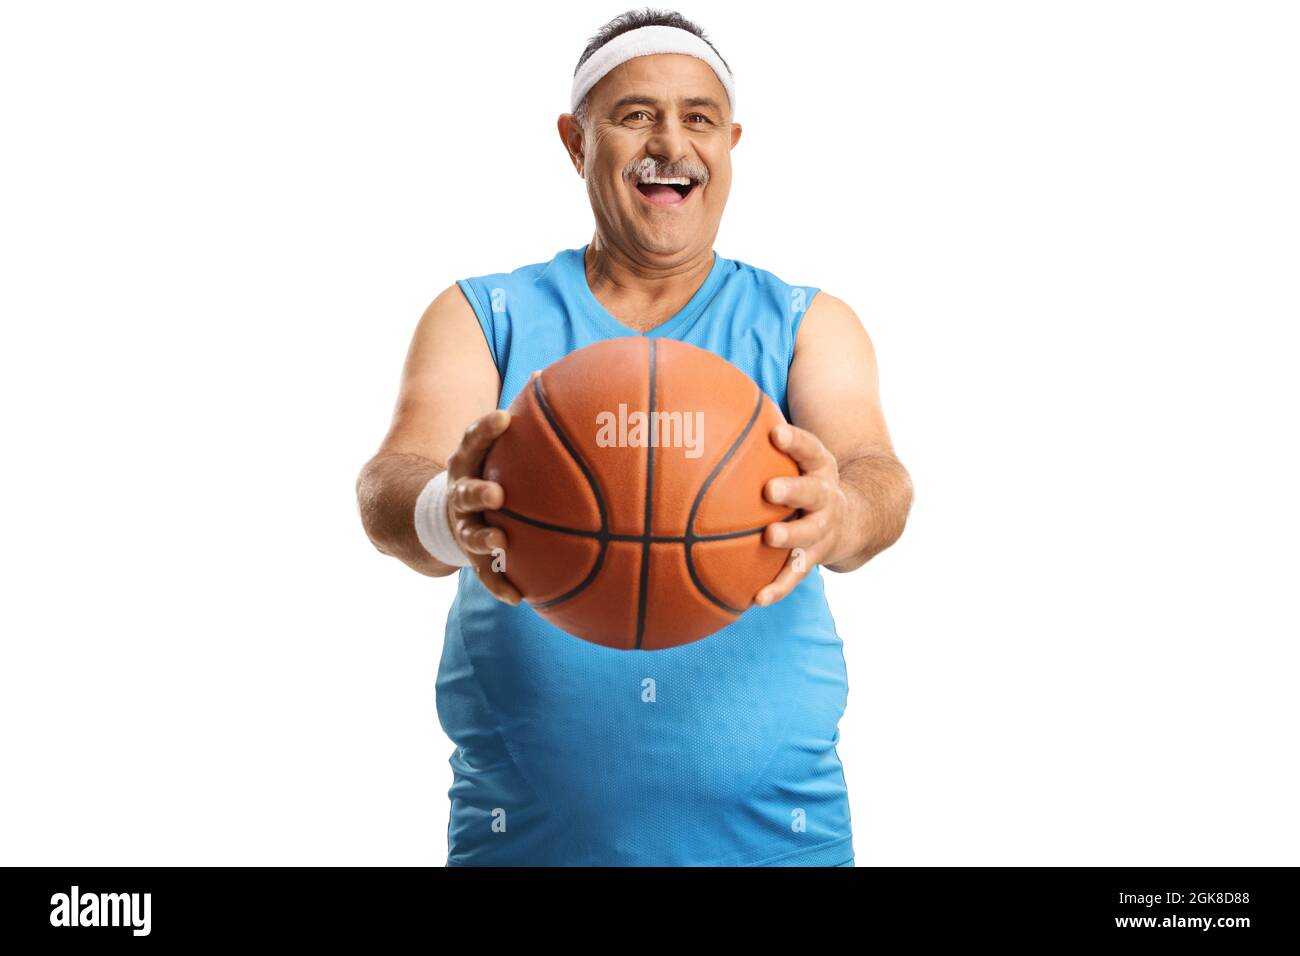 Smiling mature man shwoing a basketball in front of camera isolated on white background Stock Photo